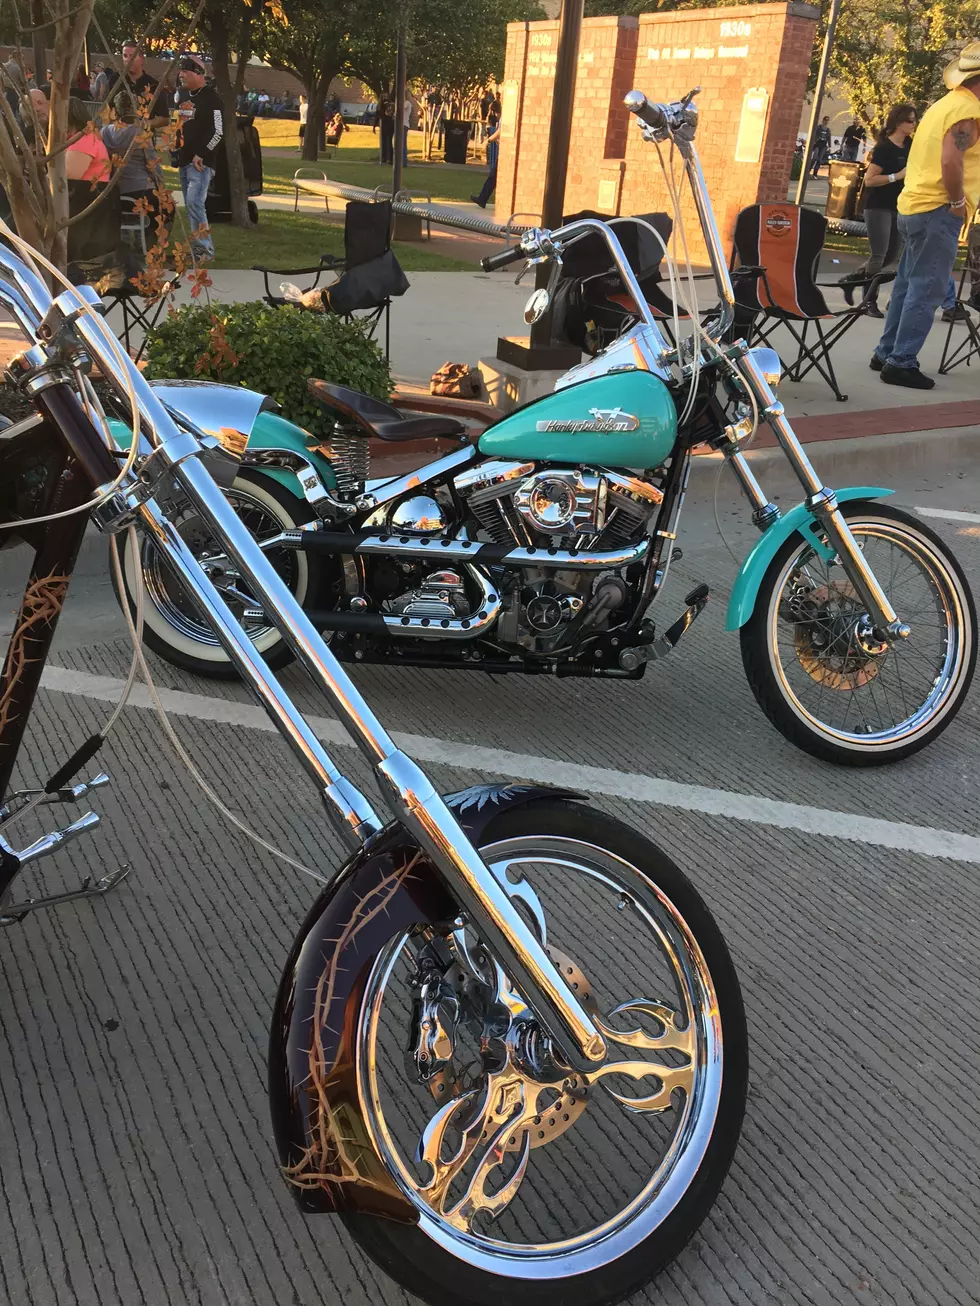 Motorcycle Fest Comes To Lufkin August 11th